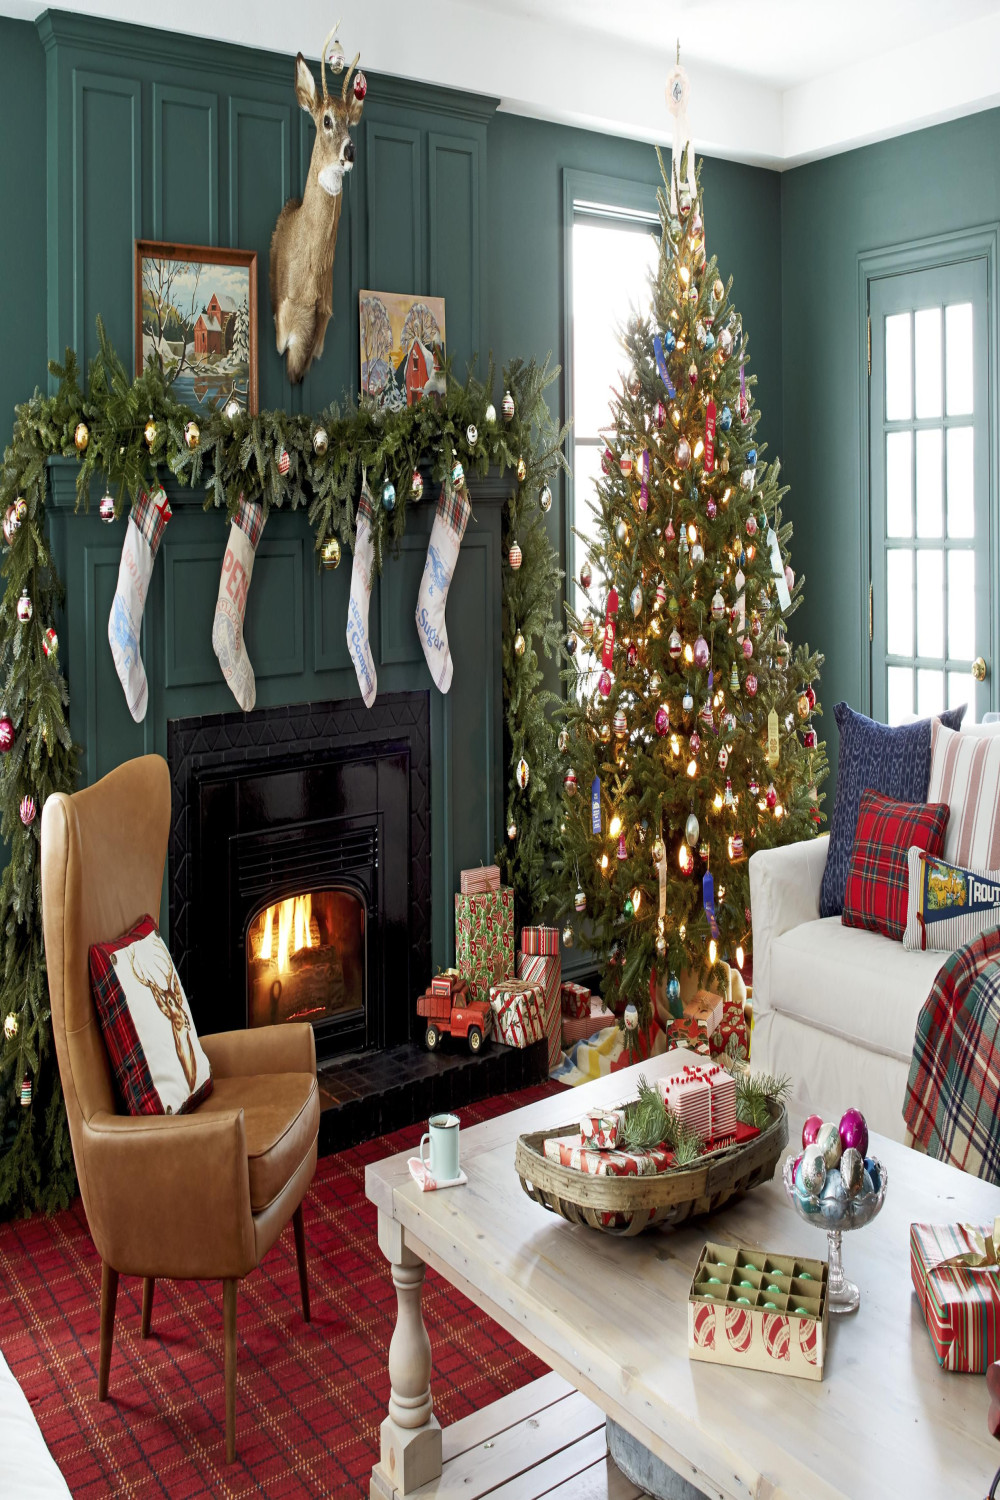 Christmas Living Room Decorating Ideas - How to Decorate a